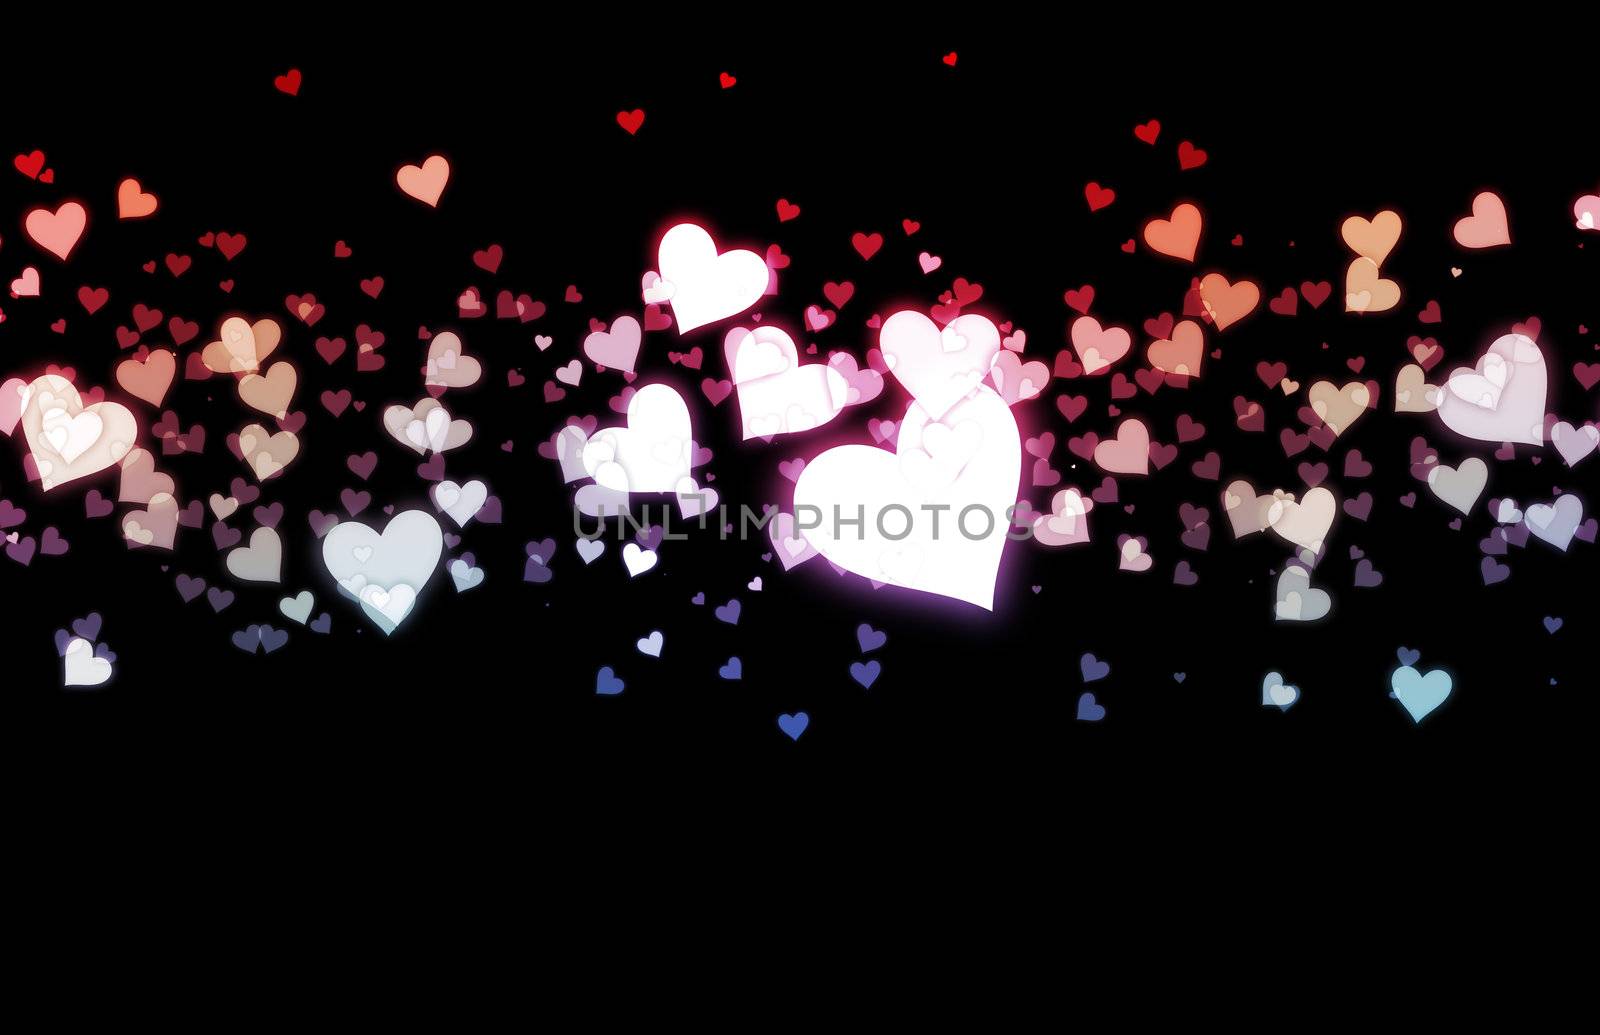 Romance Background with Floating Hearts as Art